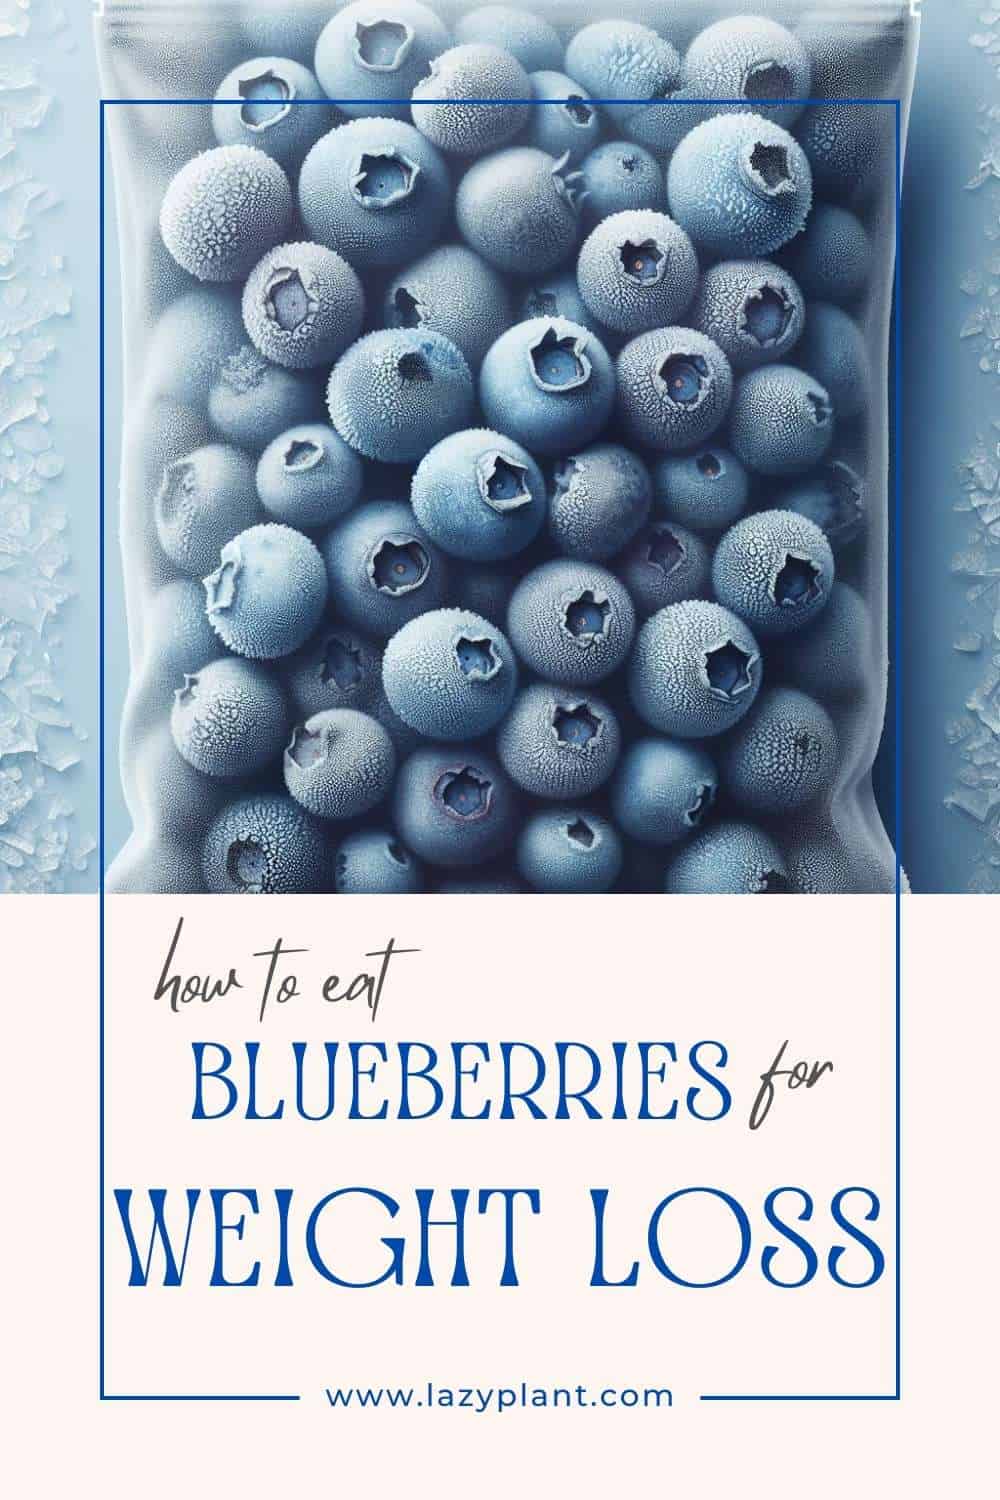 Oatmeal with blueberries is the healthiest breakfast idea for Weight Loss!